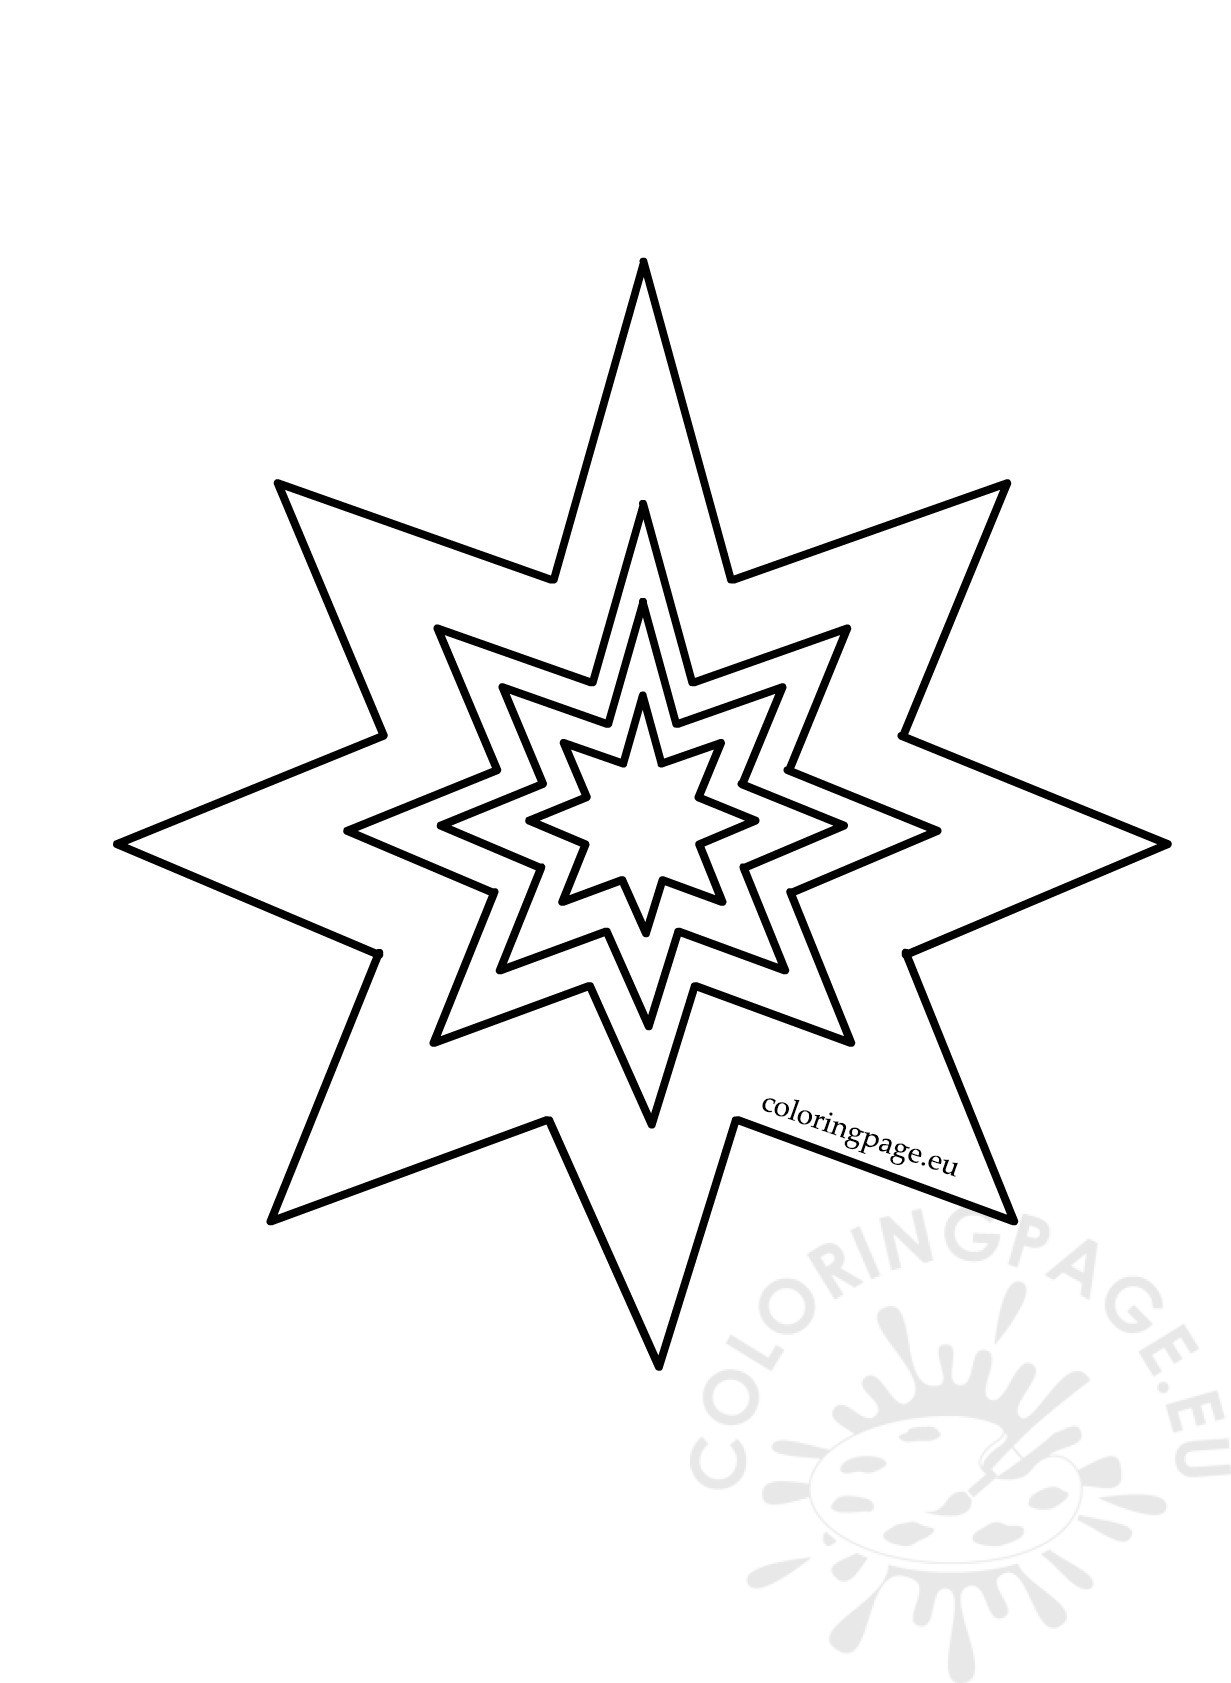 Download Eight Pointed Star Pattern - Coloring Page